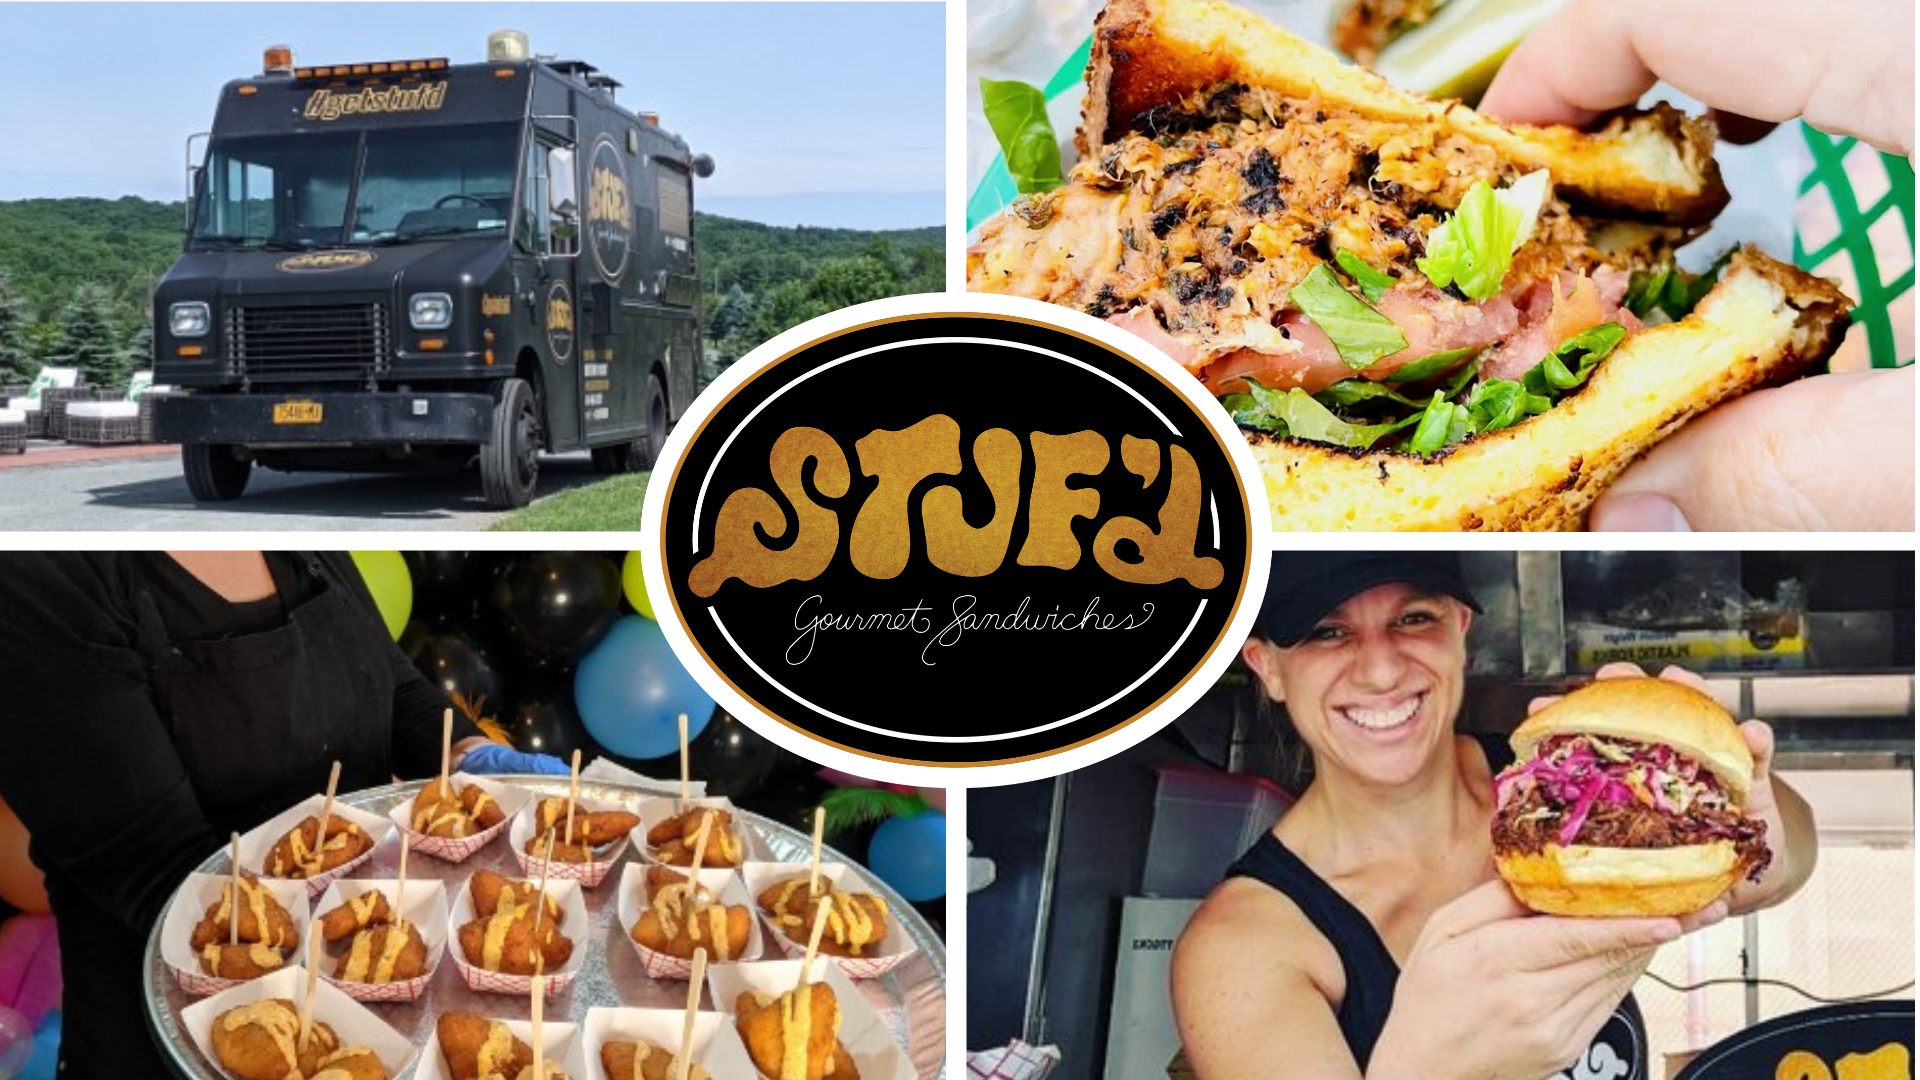 Oceanside, NY Catering Service Customizes Food Truck Menu For Breakfast Events